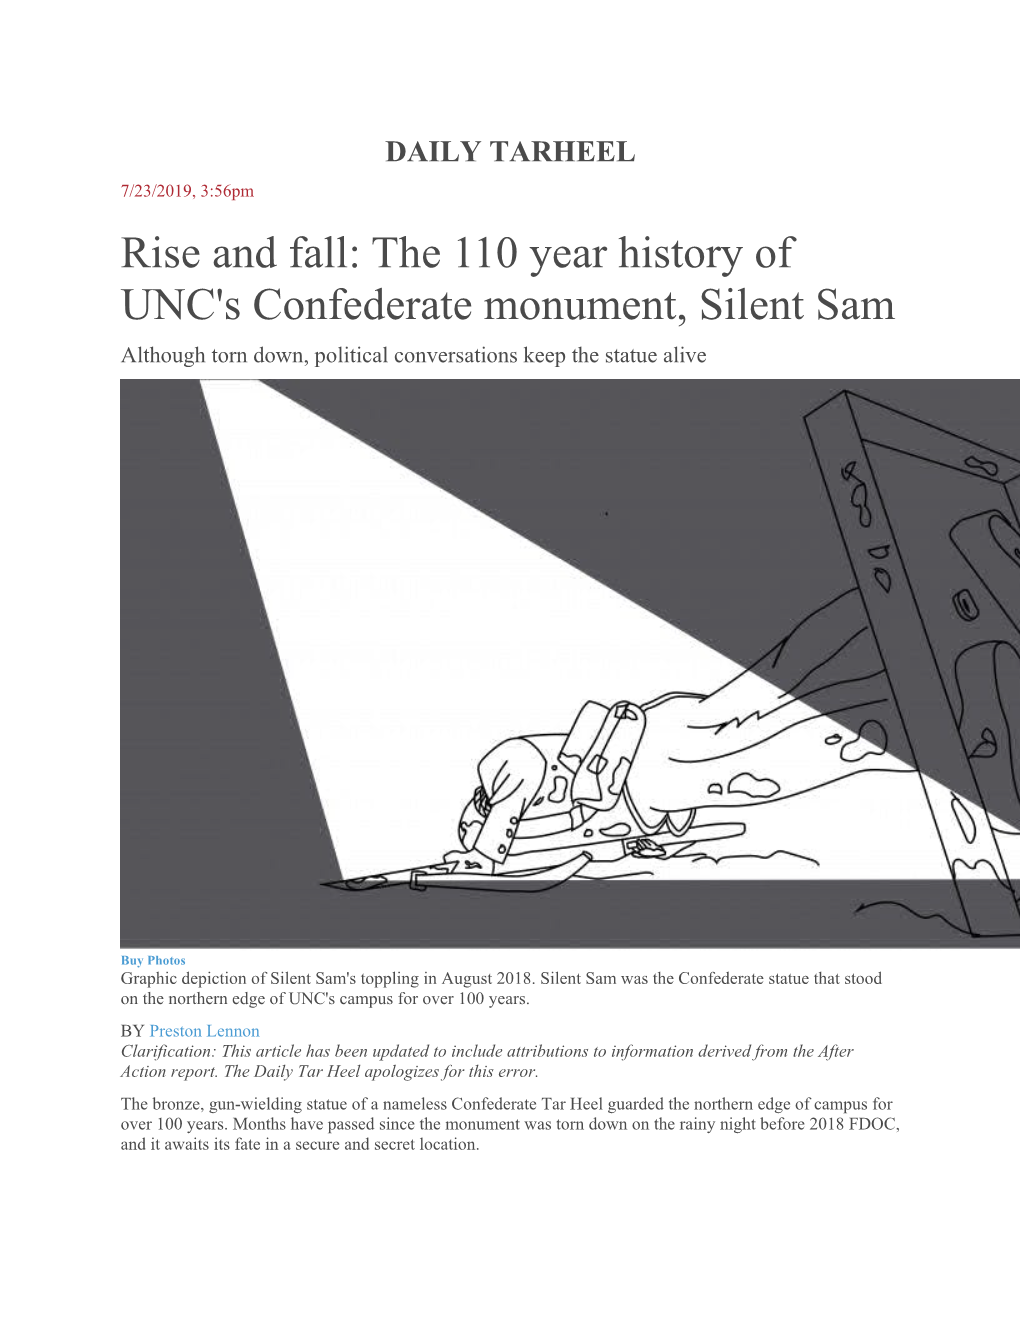 The 110 Year History of UNC's Confederate Monument, Silent Sam Although Torn Down, Political Conversations Keep the Statue Alive